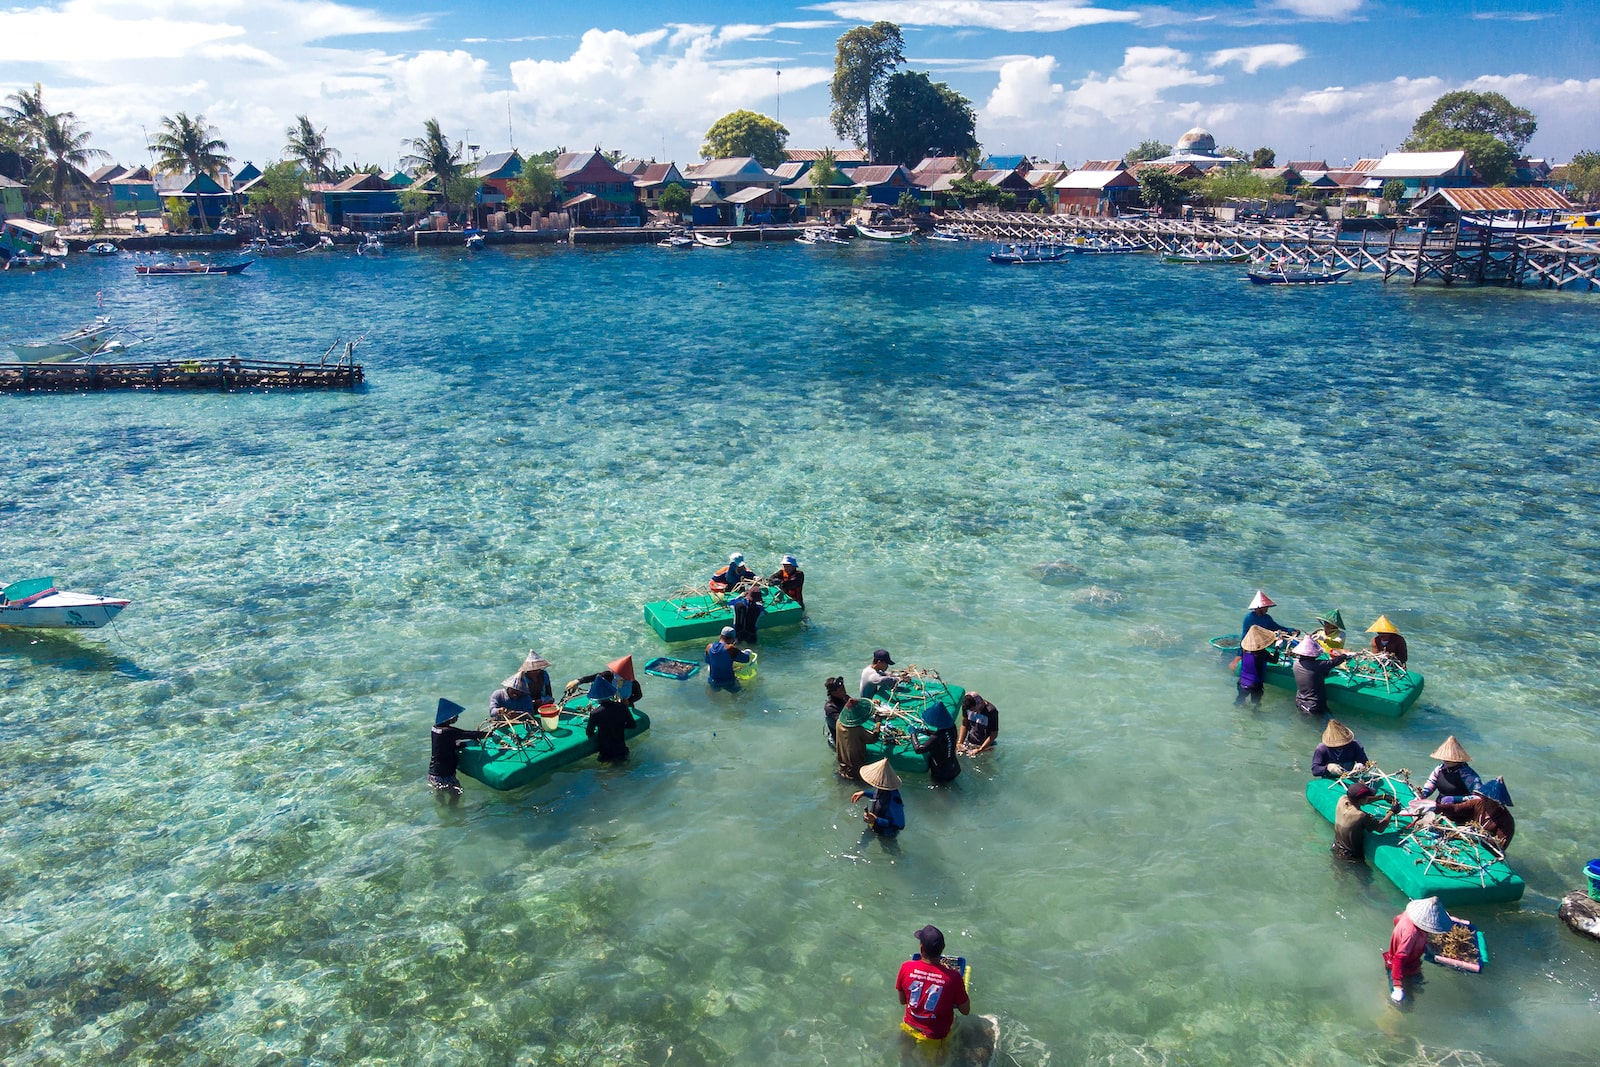 Groups of people surround green tables with star-shaped cages in the water off the coast of an island